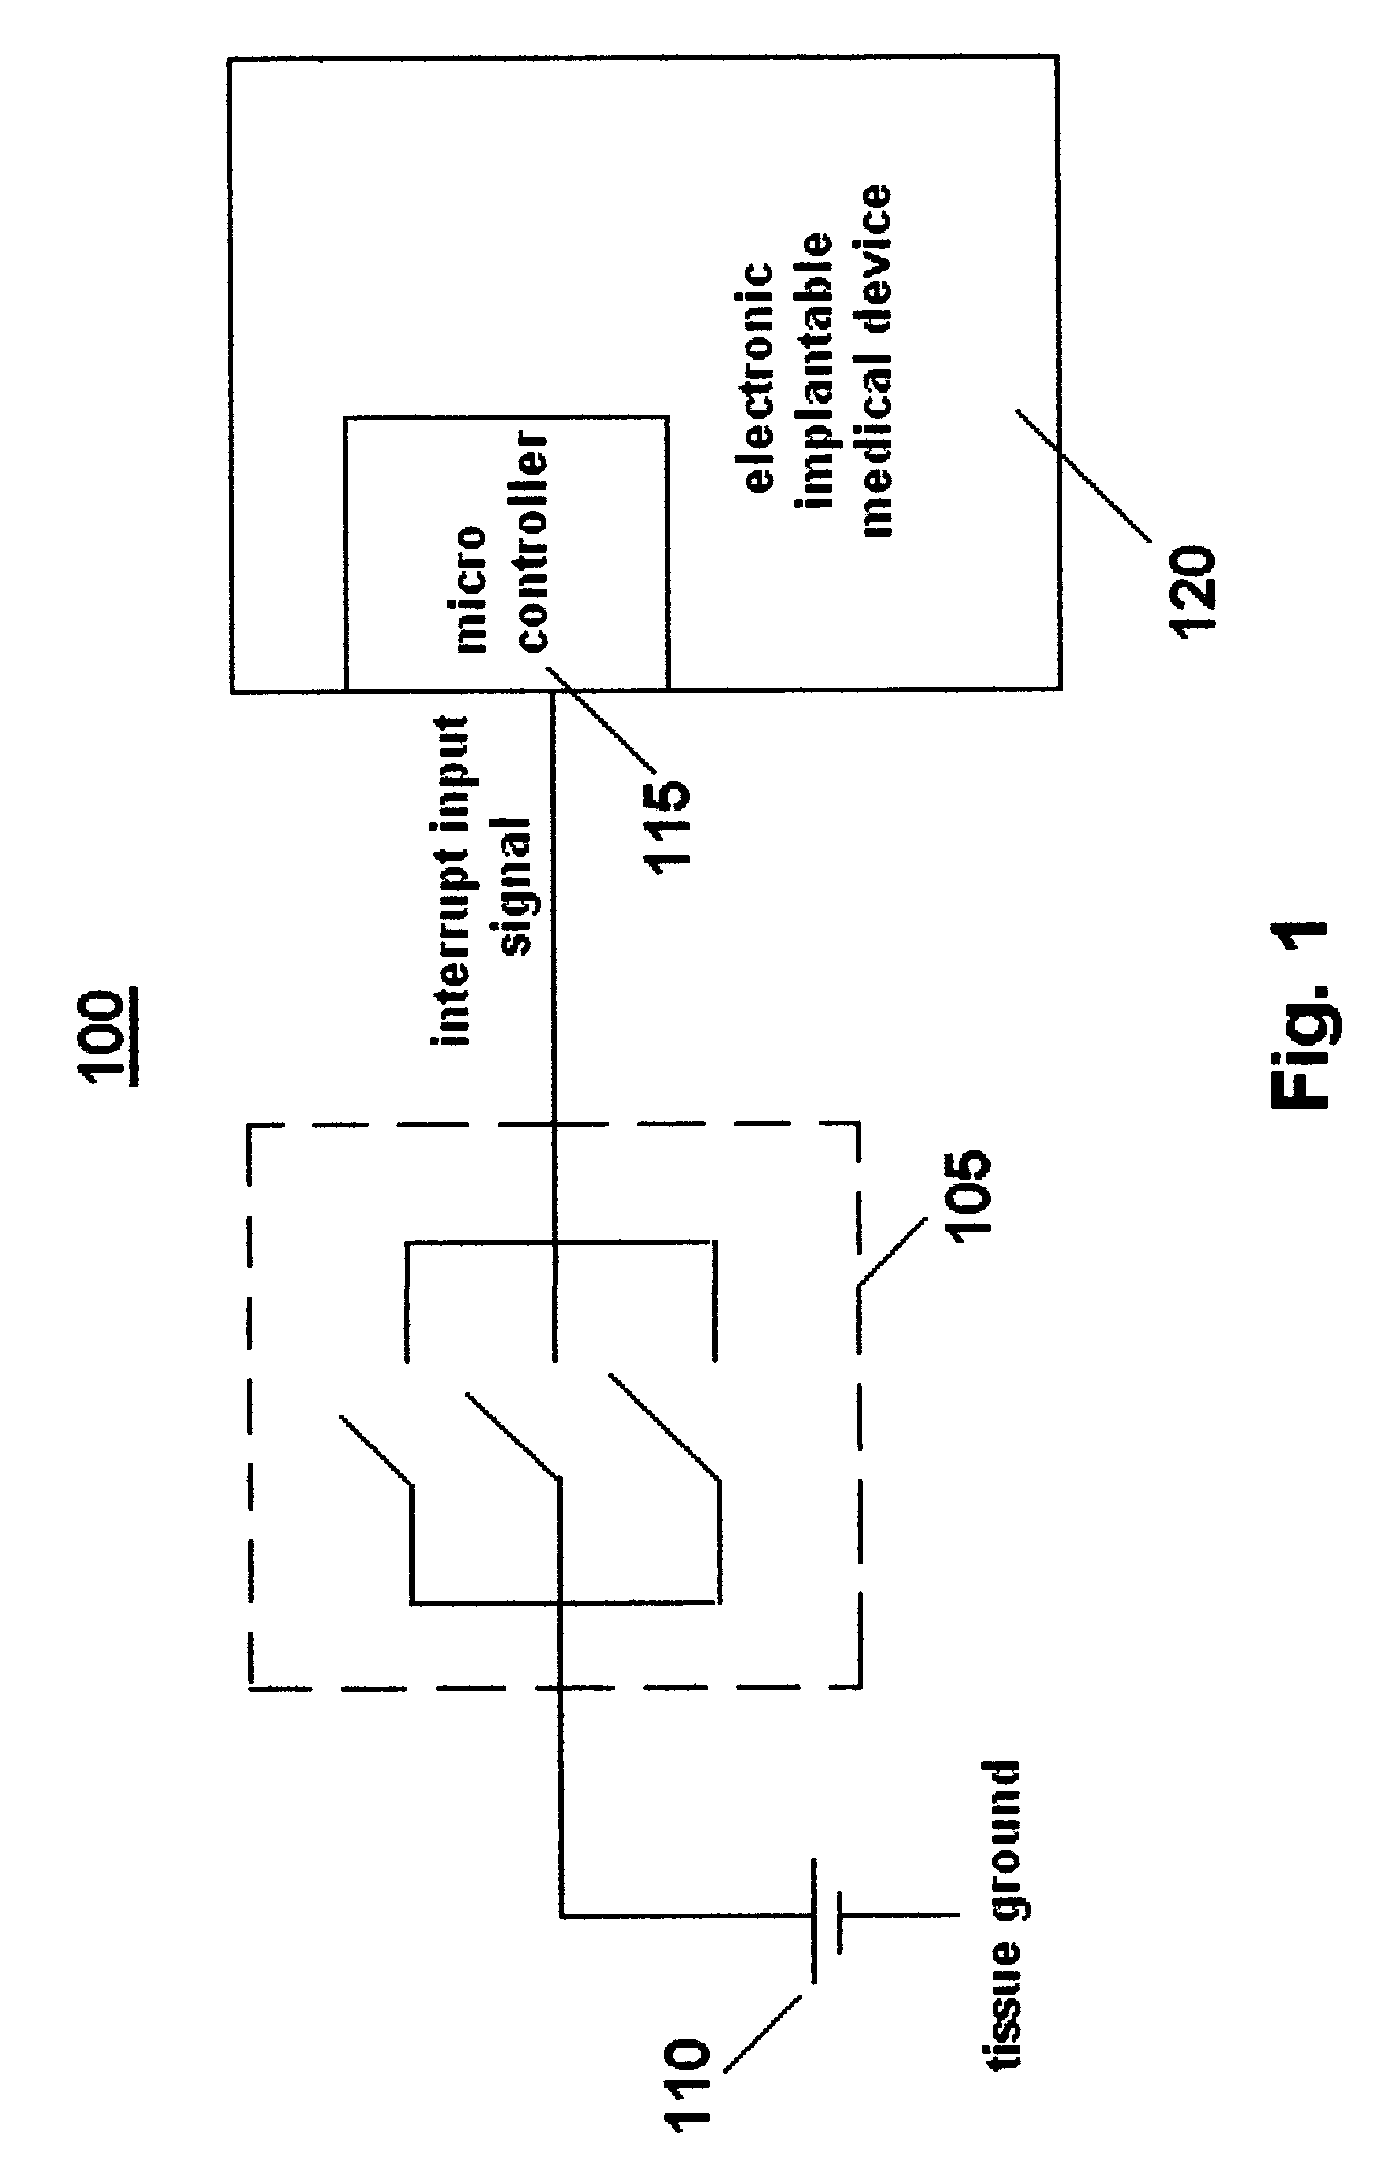 System and method for controlling an implantable medical device subject to magnetic field or radio frequency exposure